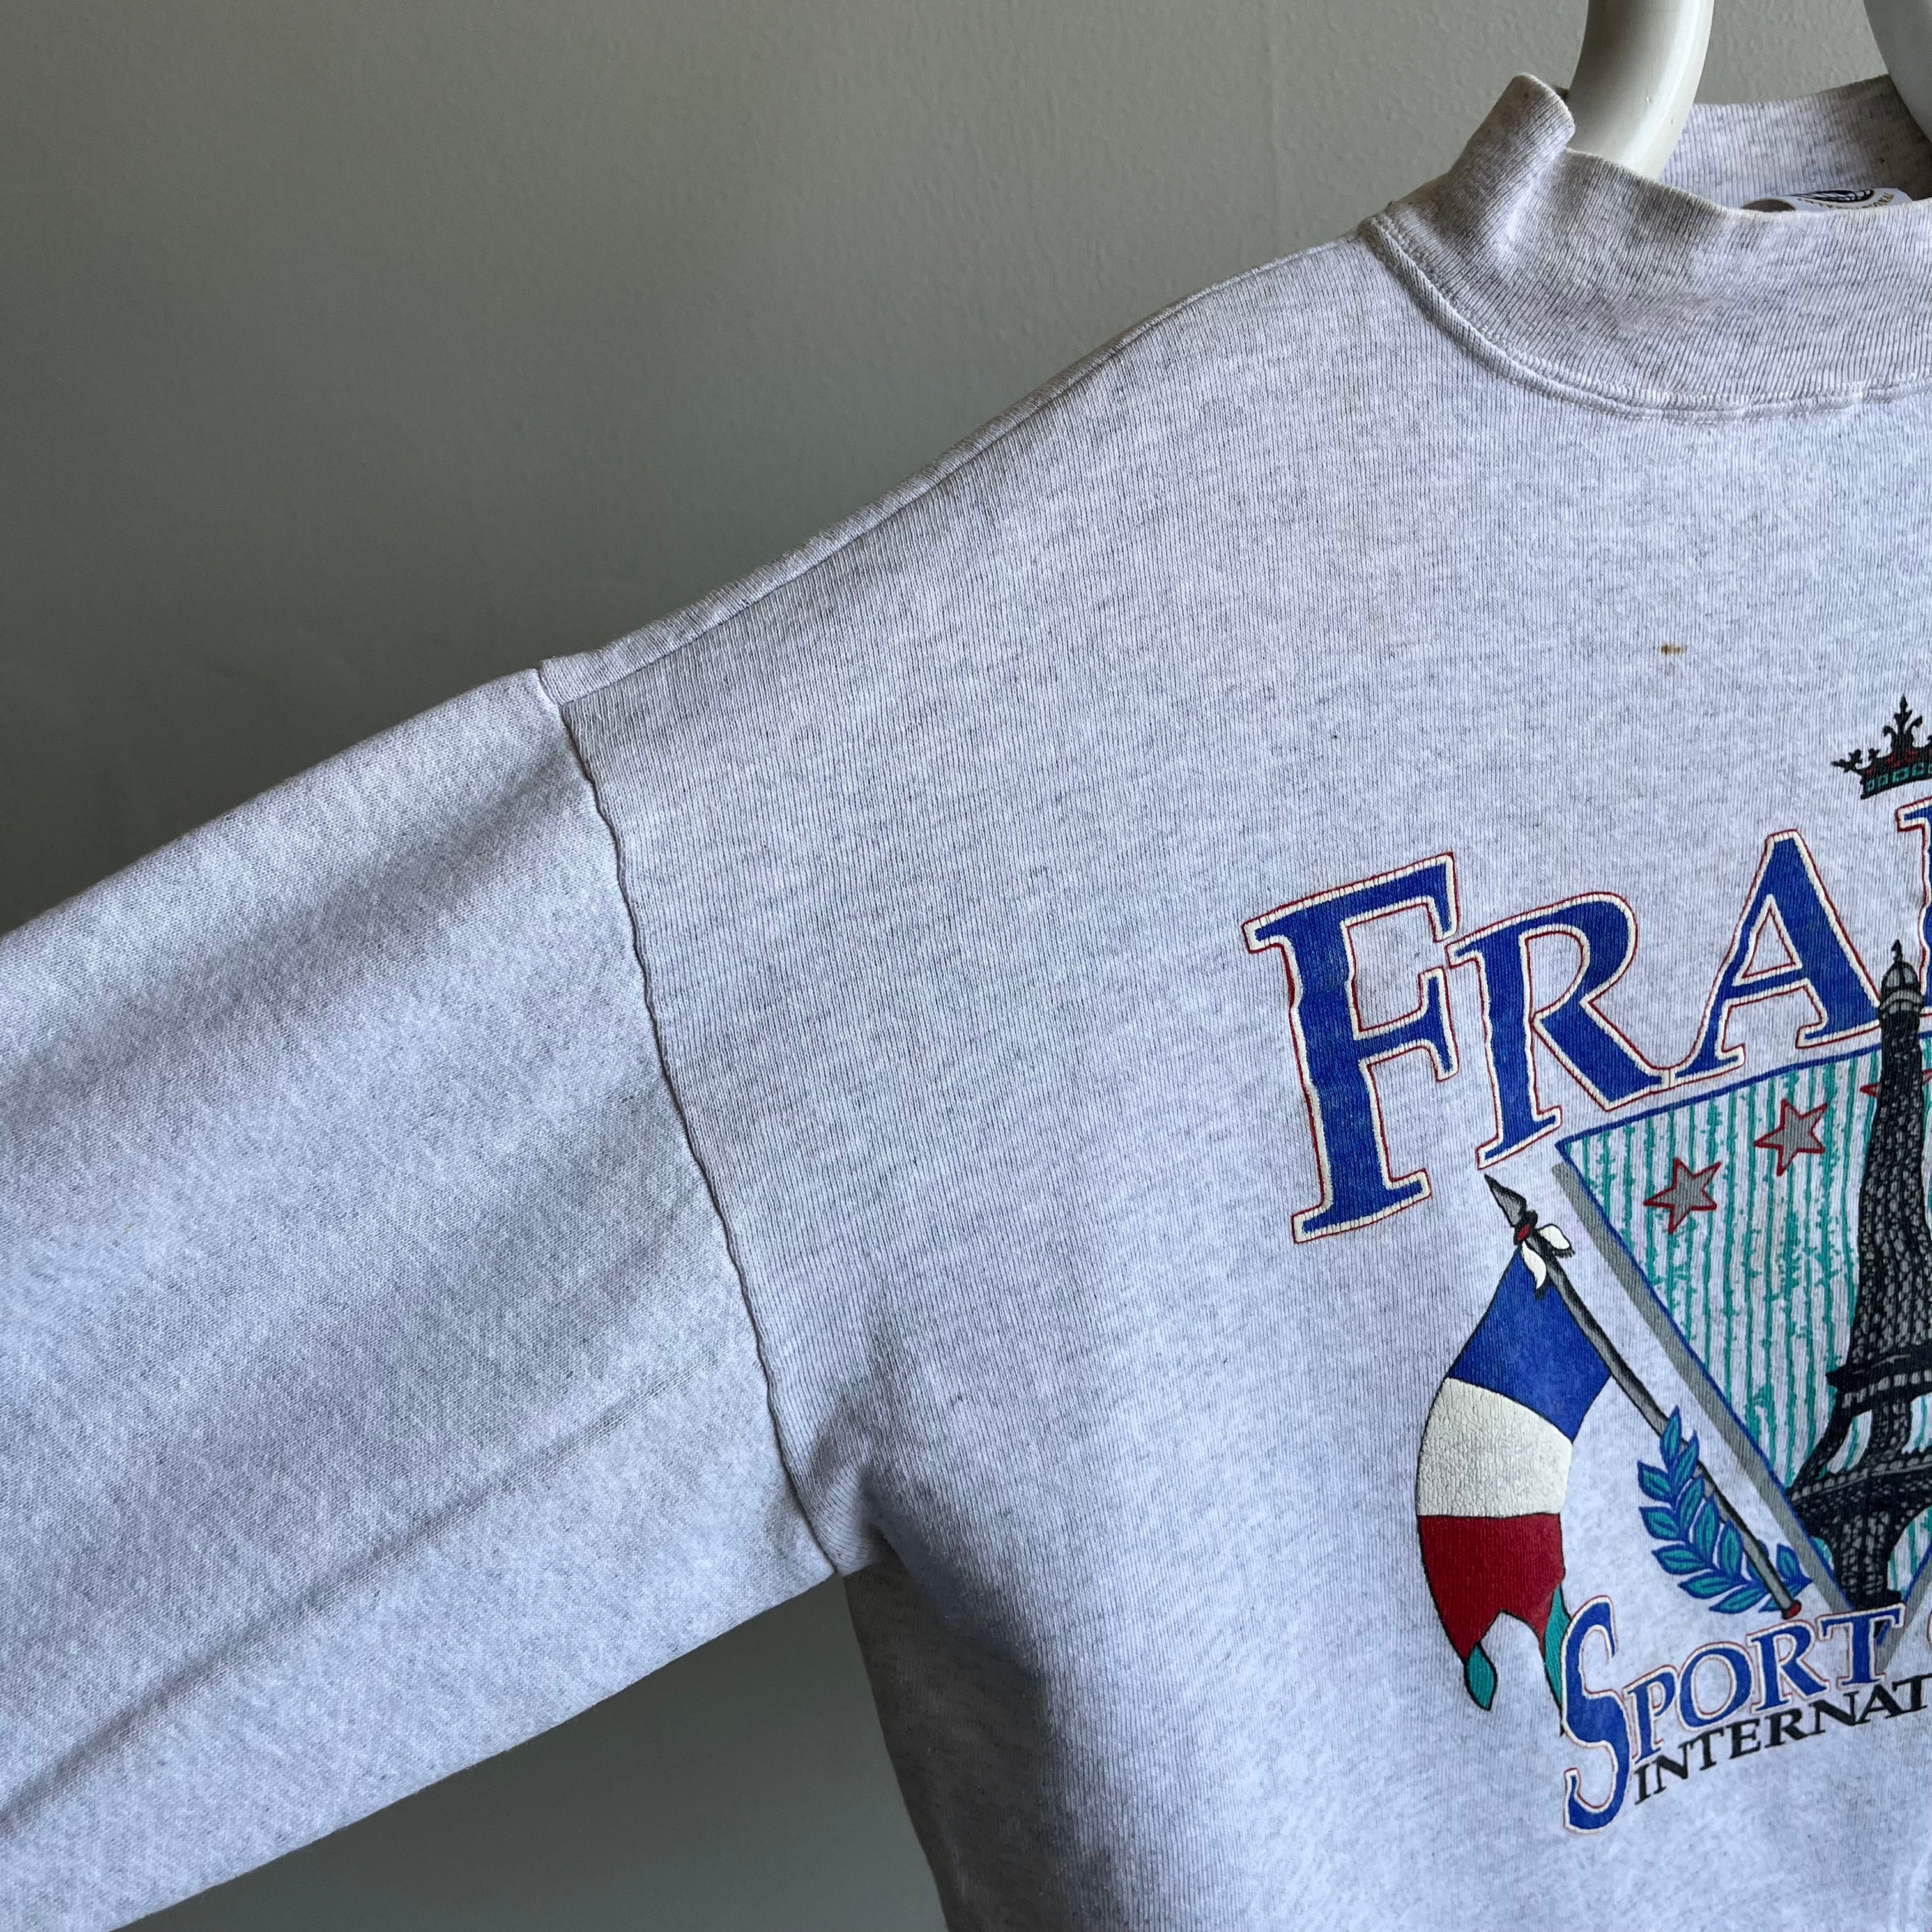 1980/90s France Mock Neck Cropped Super Stained Sweatshirt